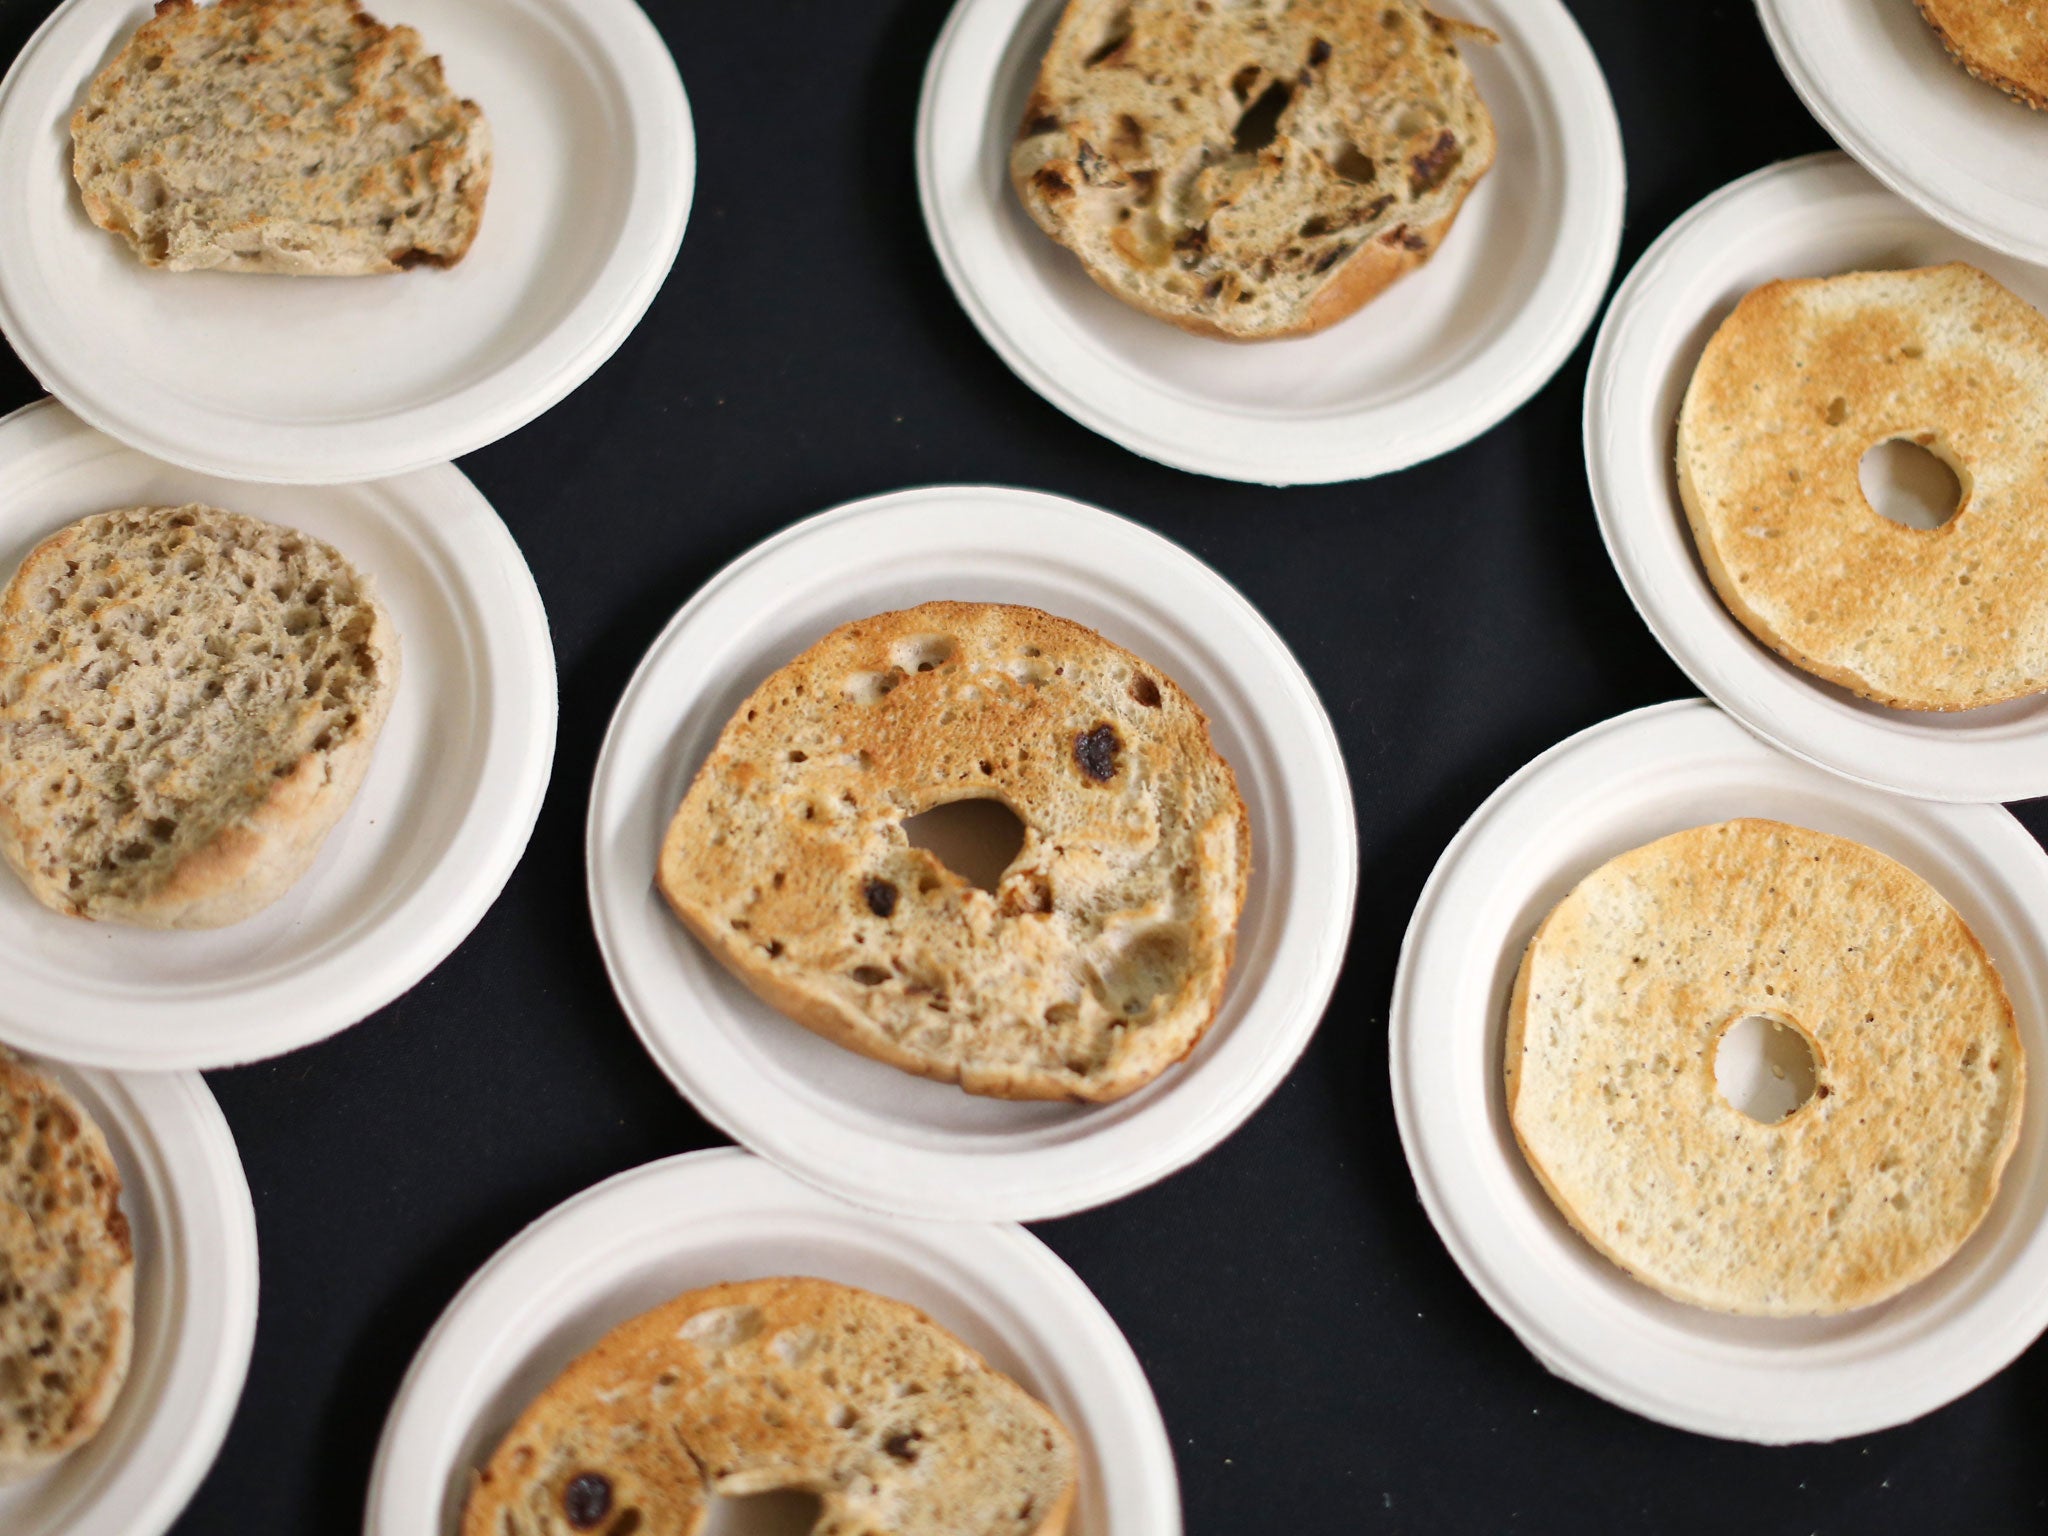 Hole in one: bagels, along with English muffins, are a breakfast staple in New York